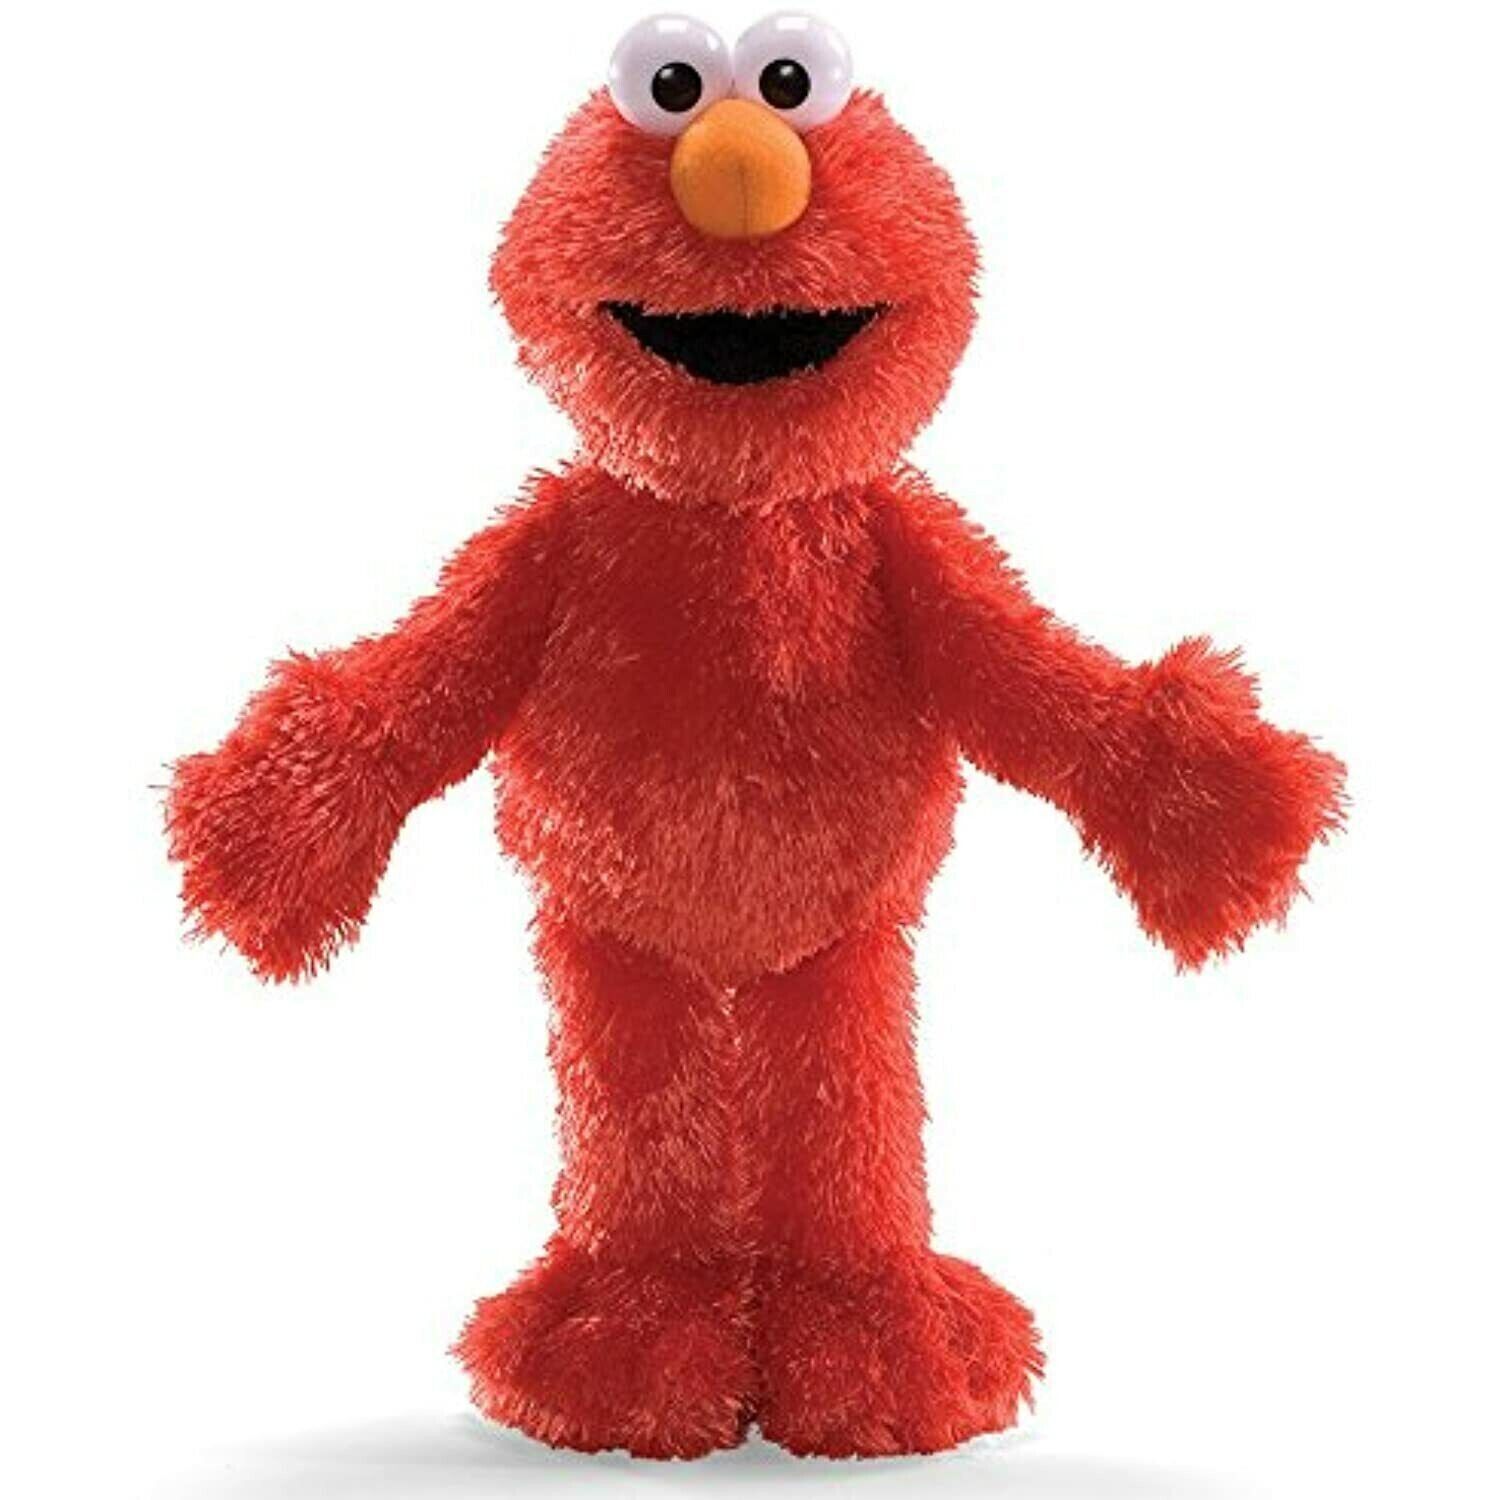 Primary image for SESAME STREET 13” Plush Stuffed ELMO Doll by GUND, 2012, NEW with Tags